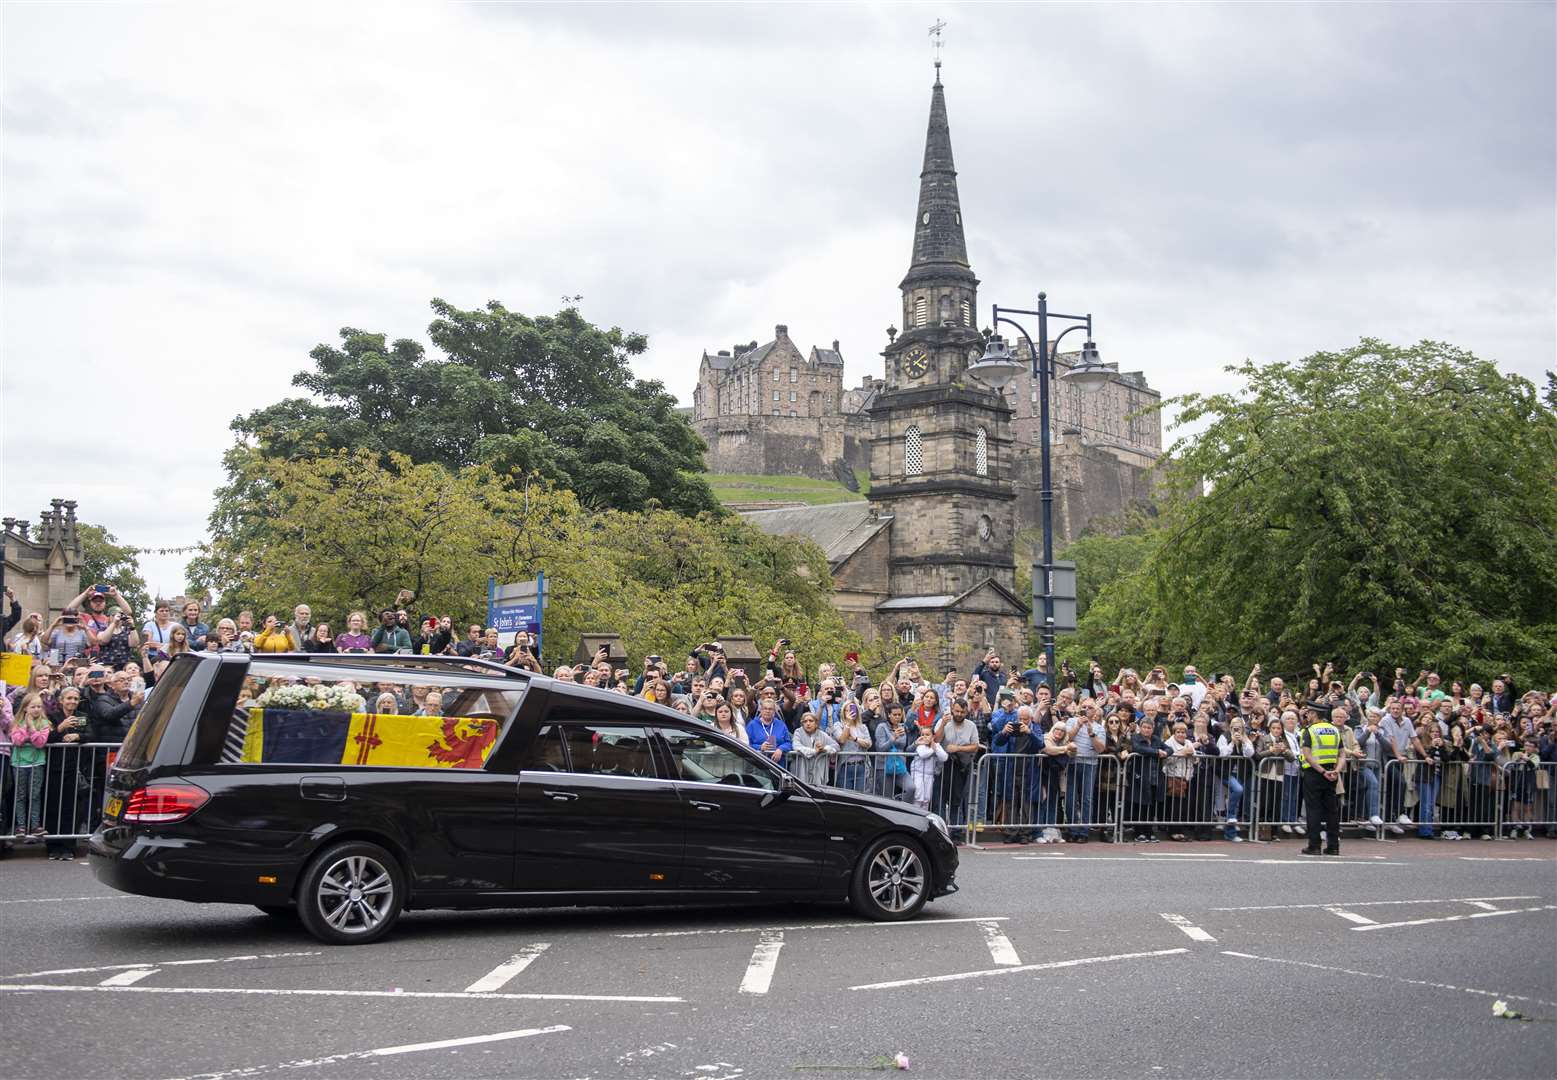 The Queen’s coffin will be in Edinburgh to view (Lesley Martin/PA)